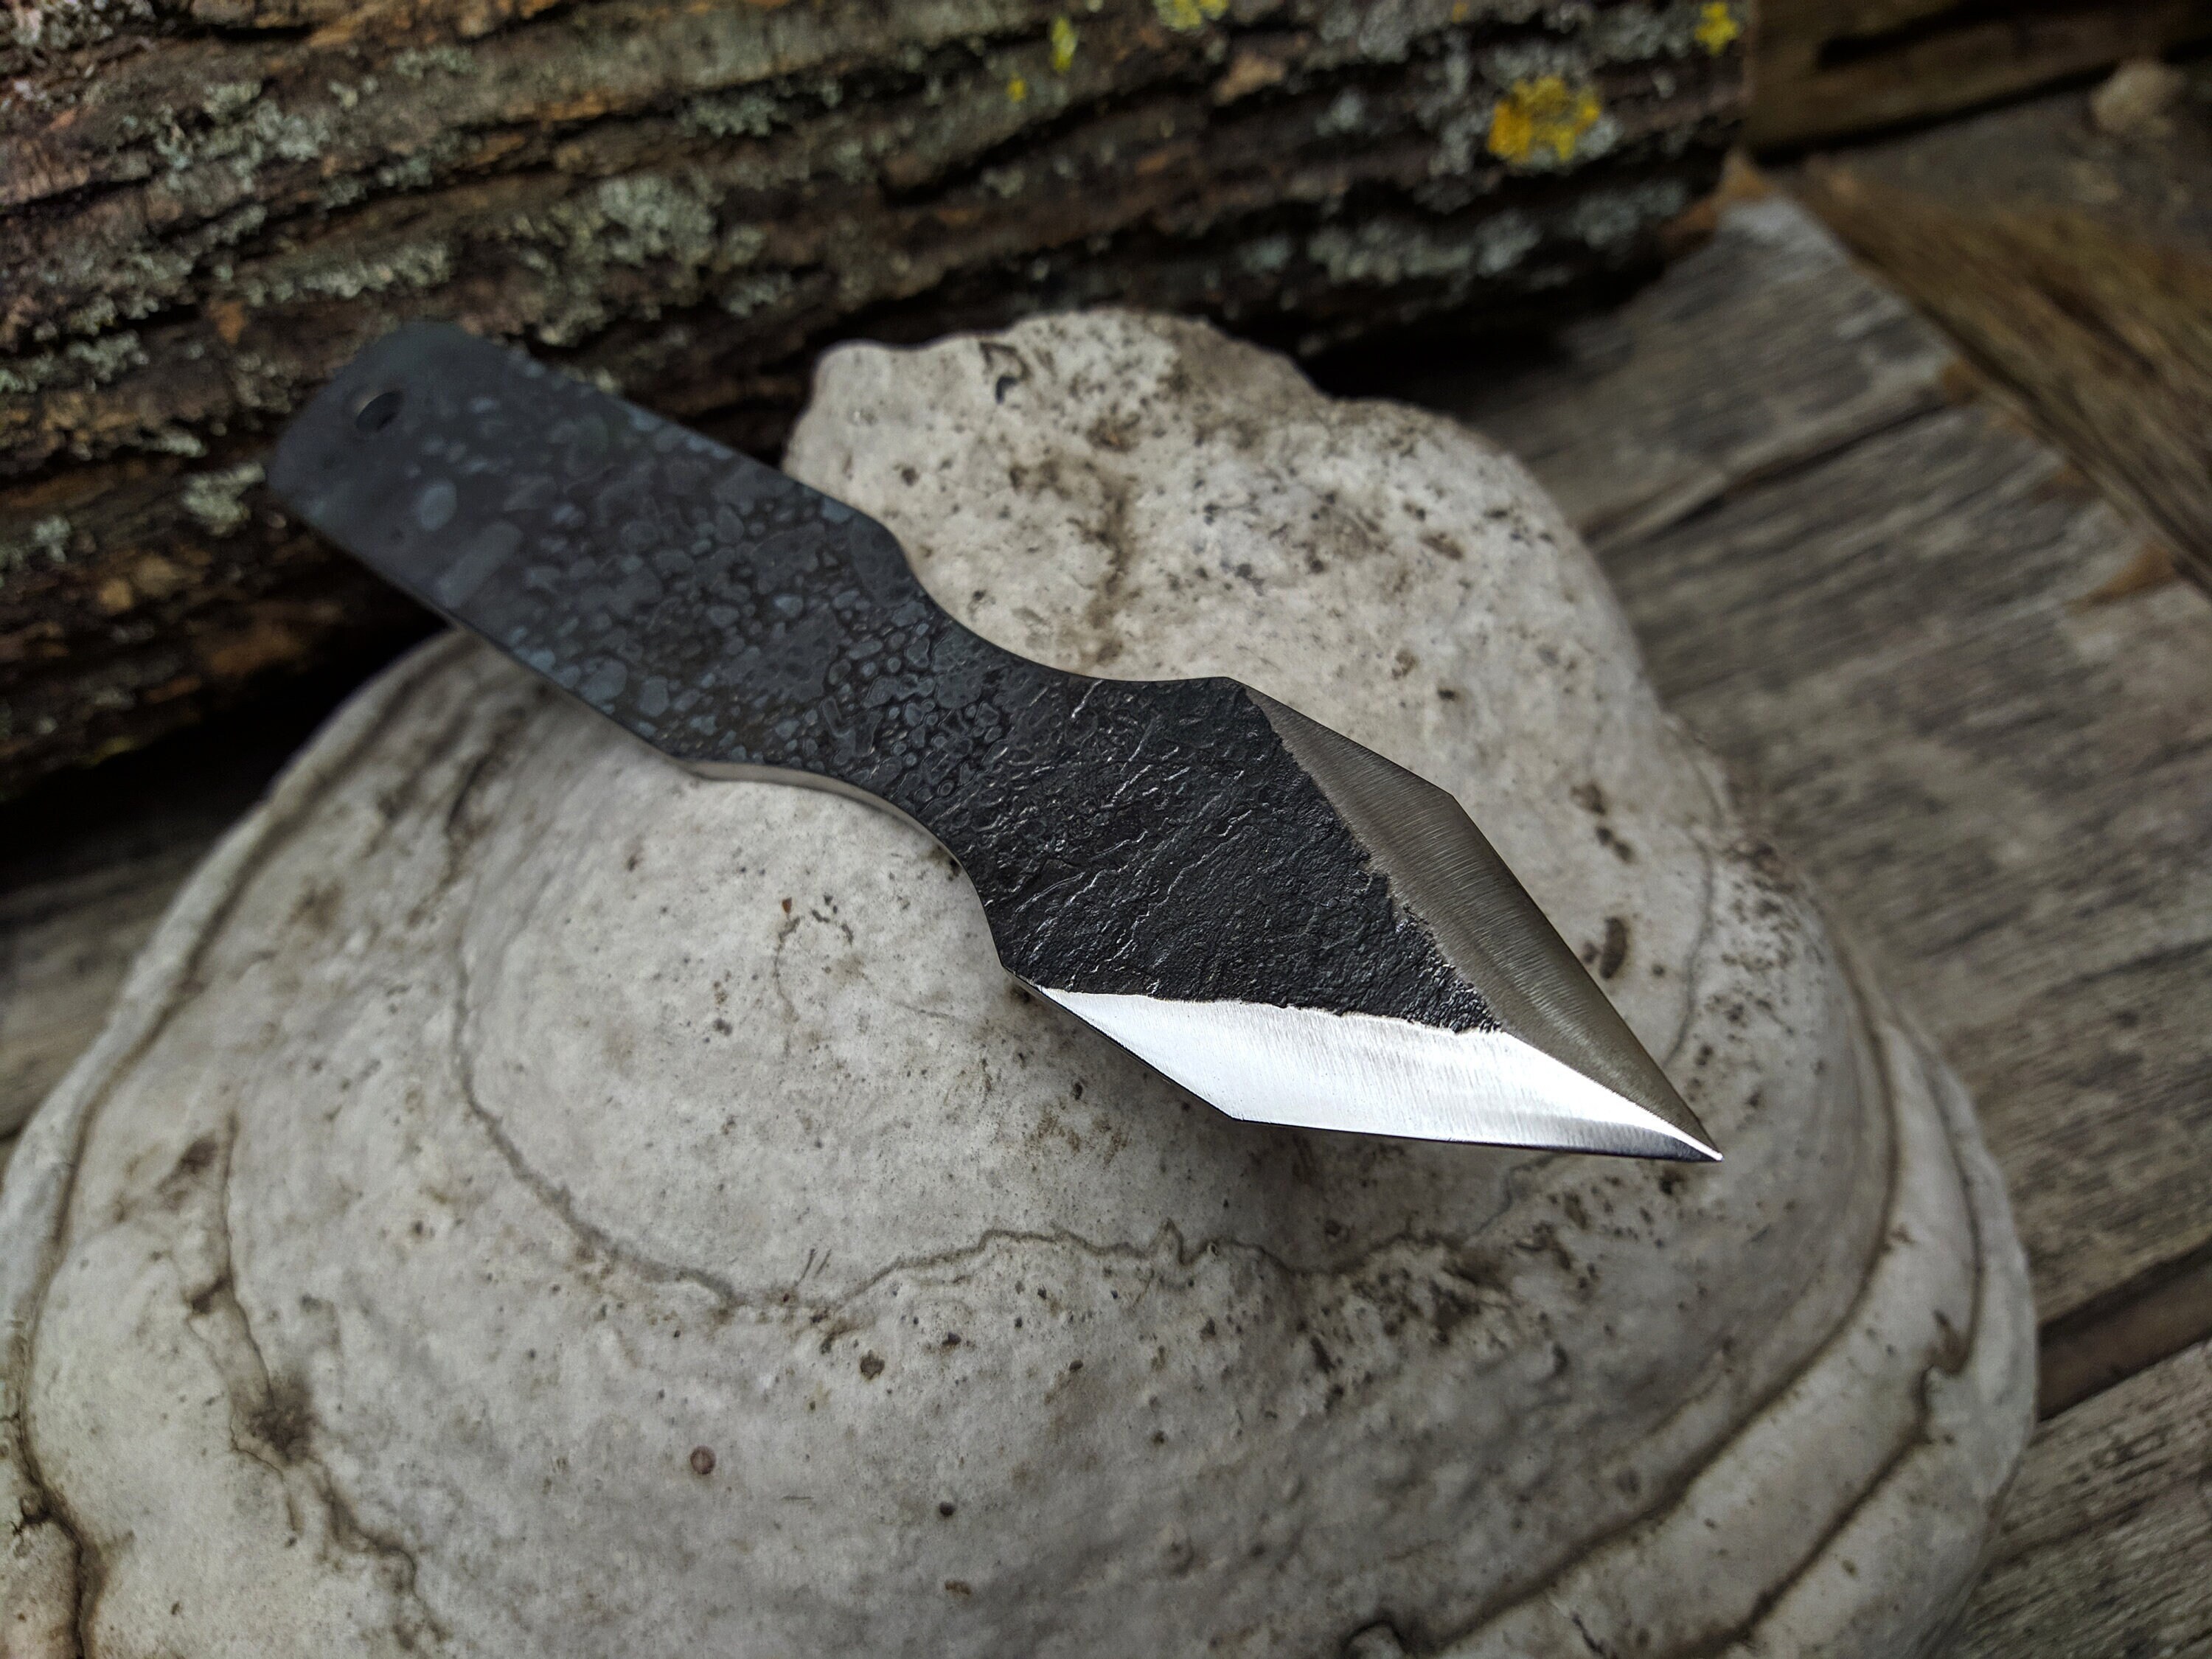 Oblique Leather Knife. Leather Skiving Knife. Hand Made Forged